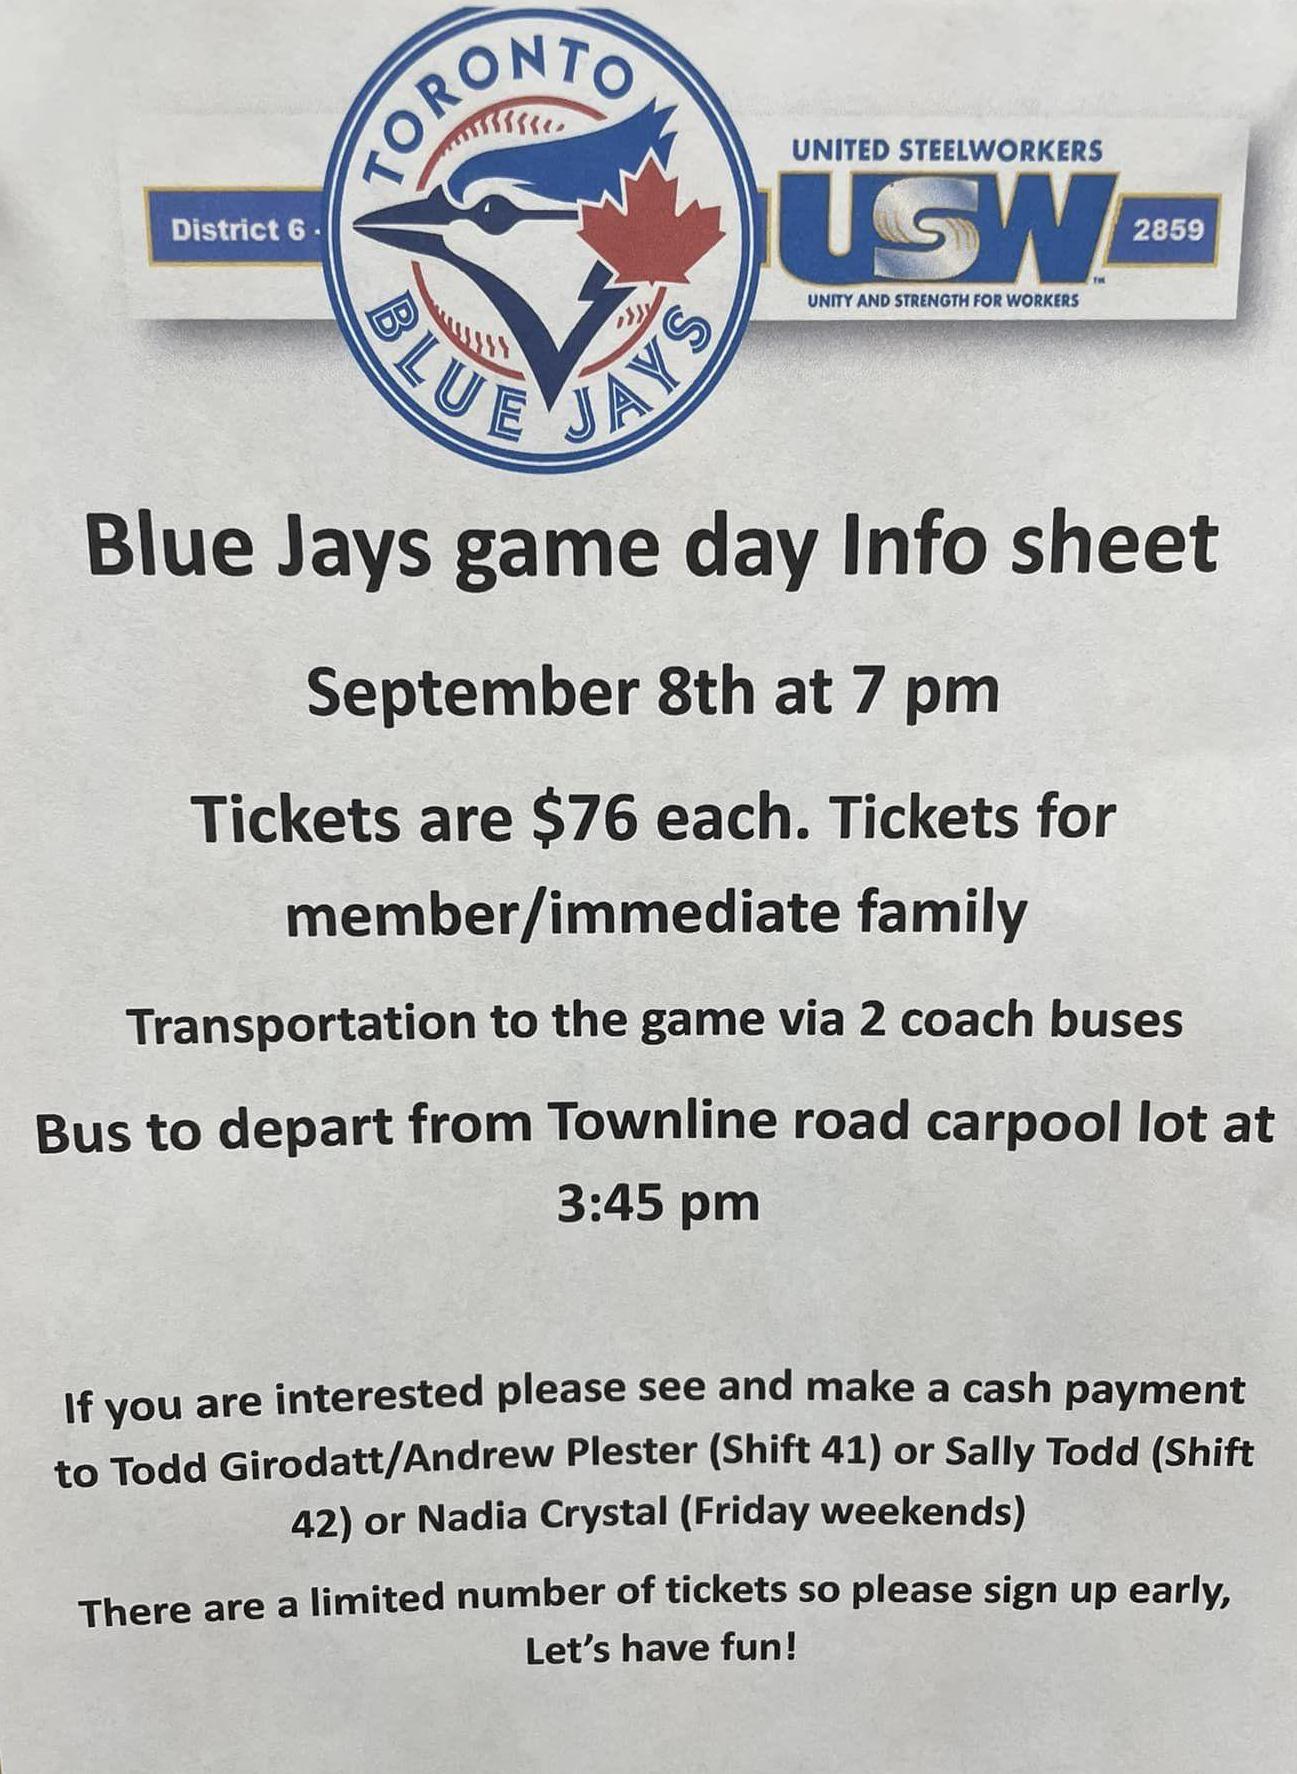 A poster describing a baseball event on September 8th at 7pm. Contact Todd Girodat or Andrew Plester for more information.